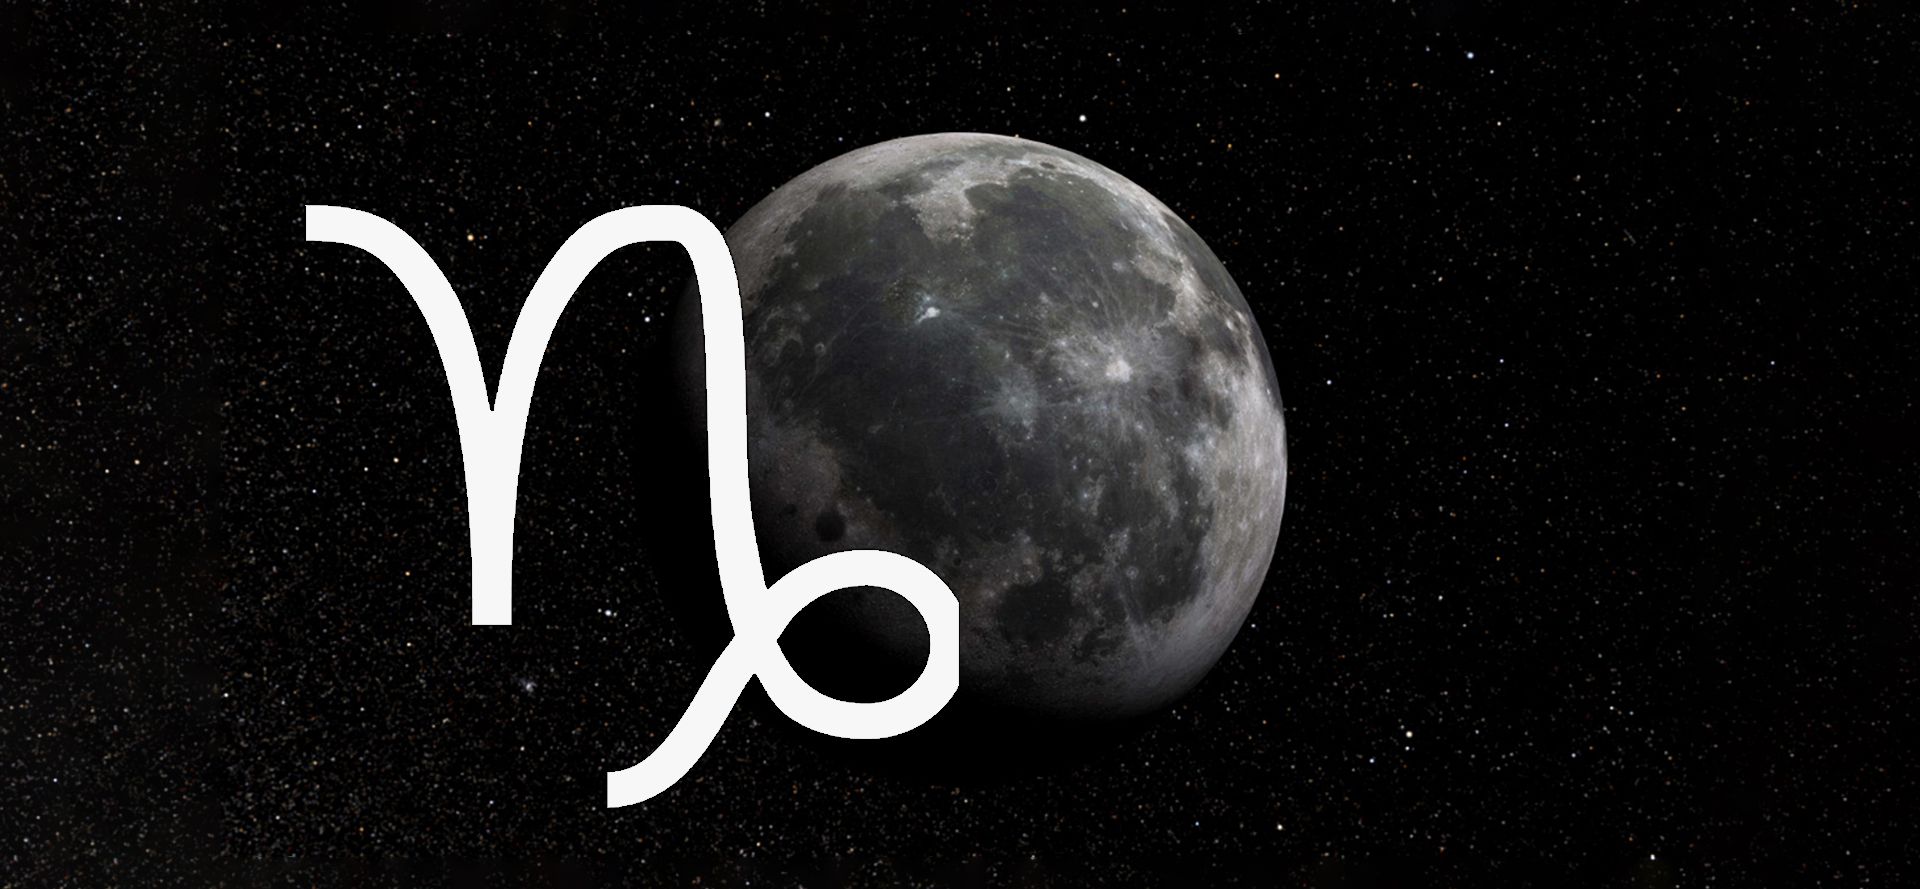 Capricorn sign and Moon.